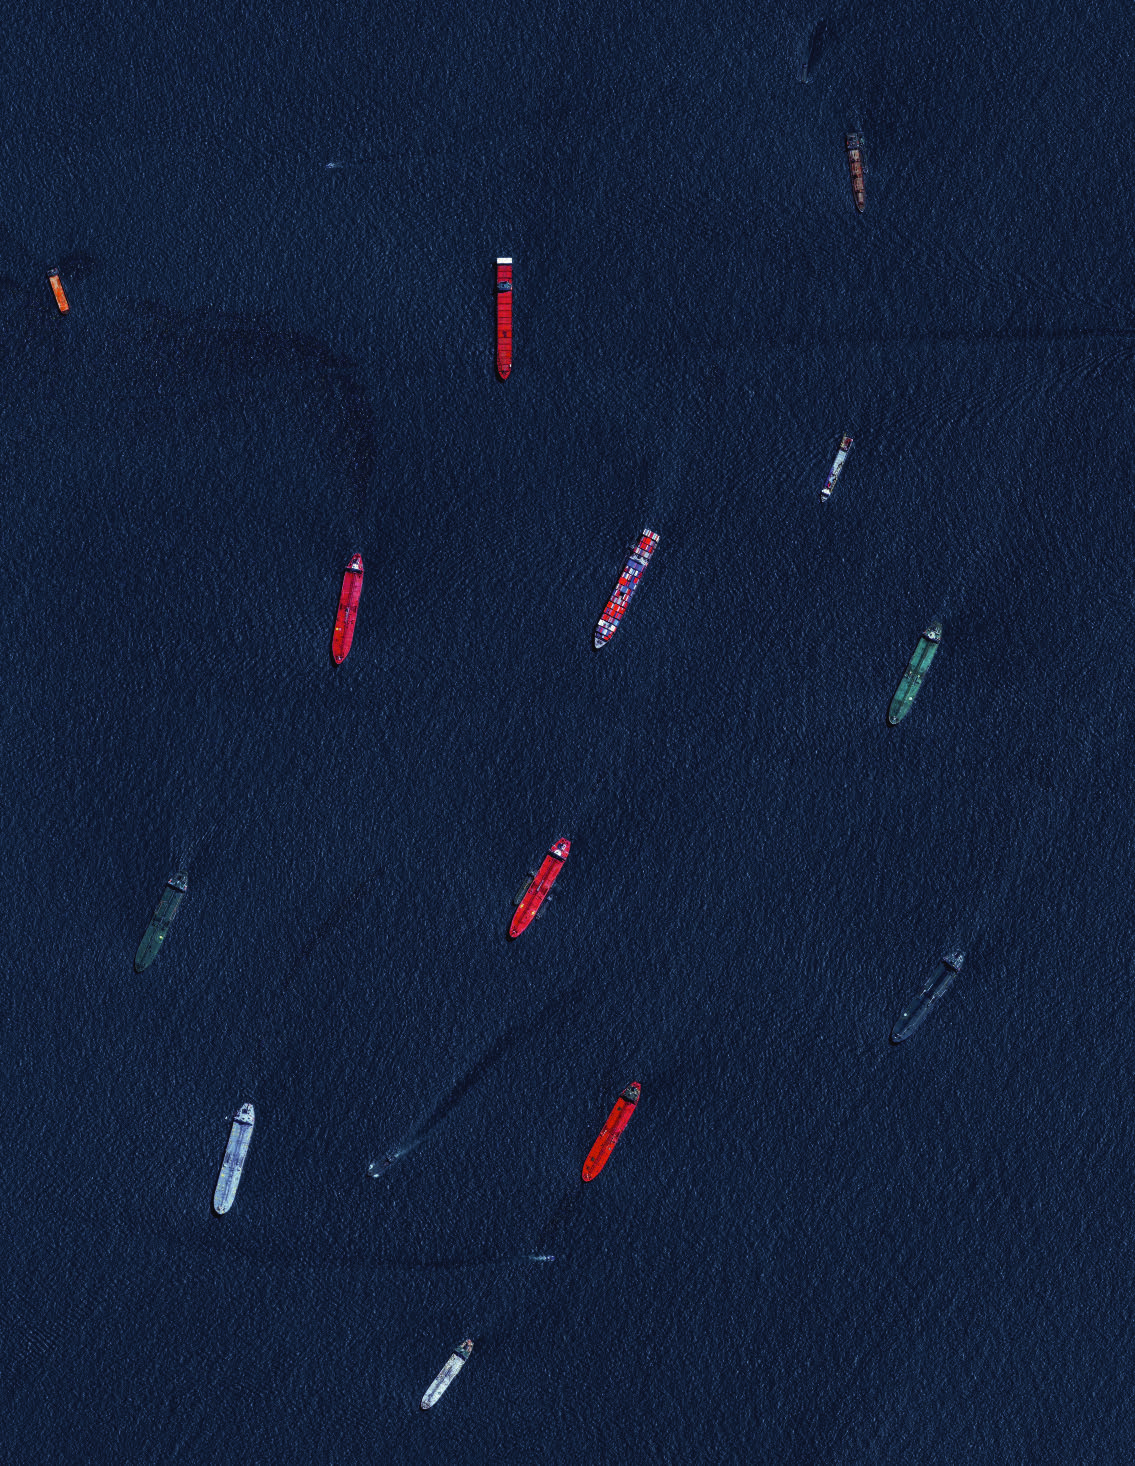 Cargo ships and tankers